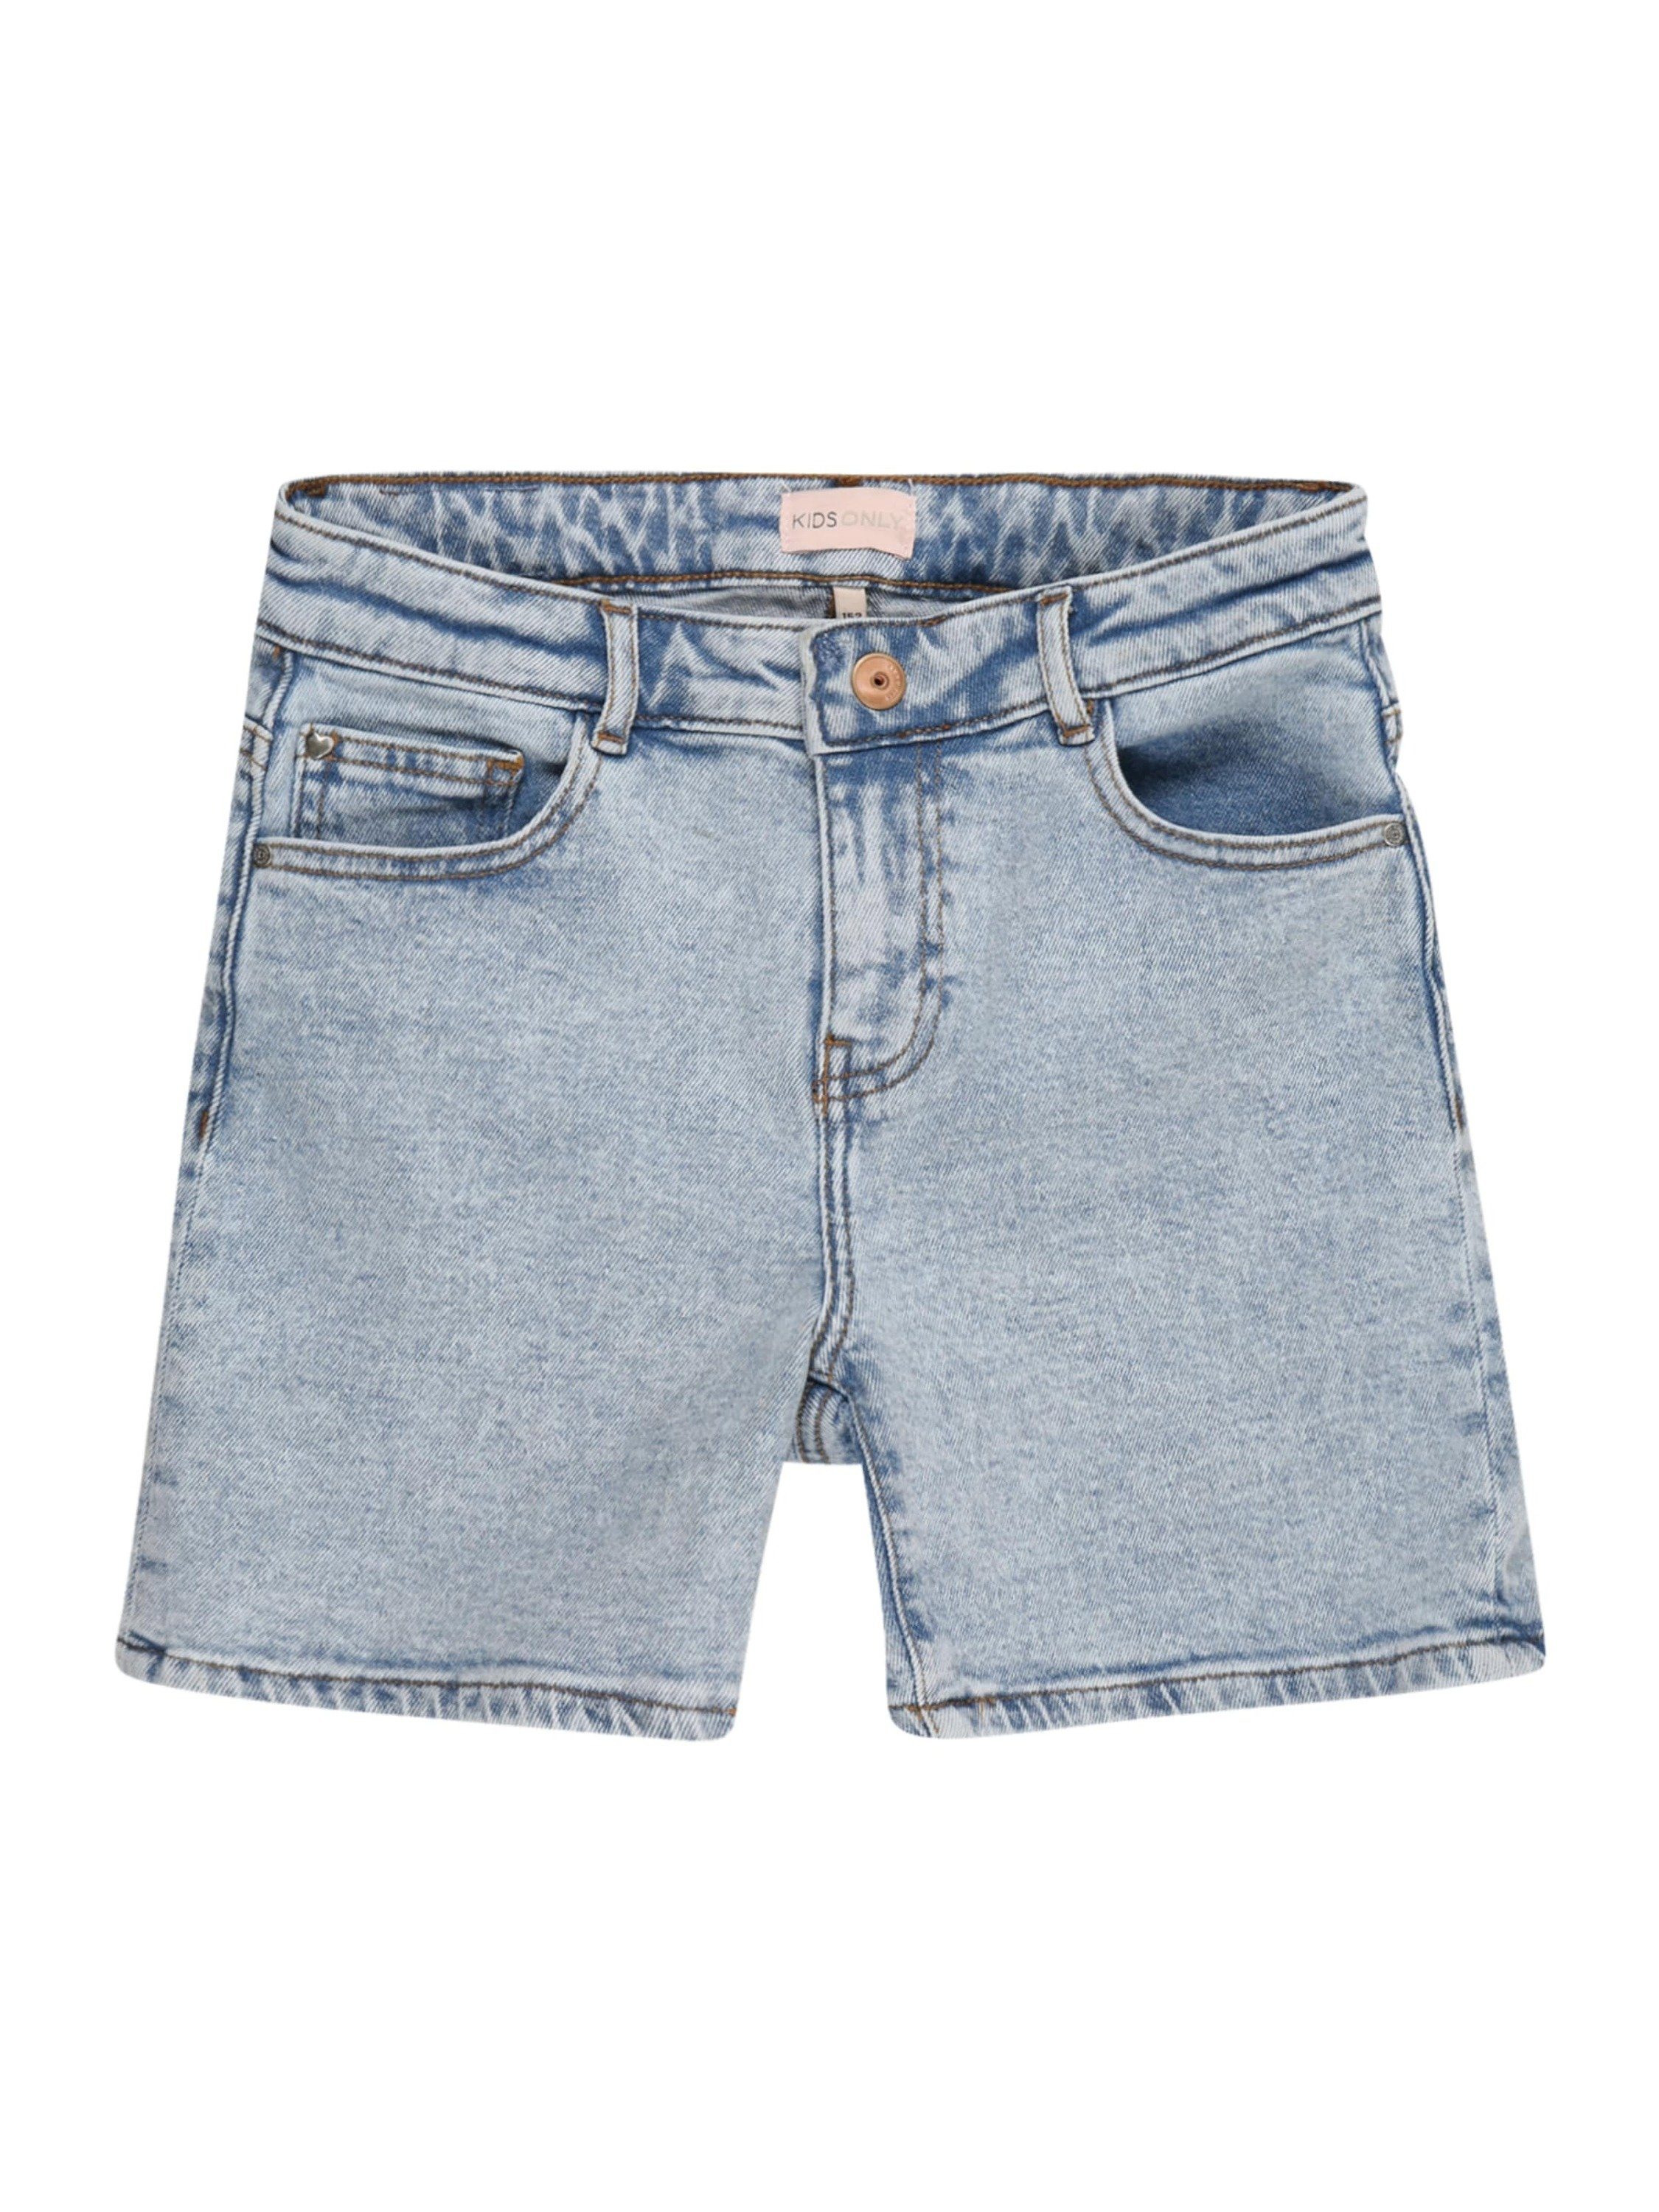 ONLY Patch/Label Flag Jeansshorts Label KONPHINE, KIDS